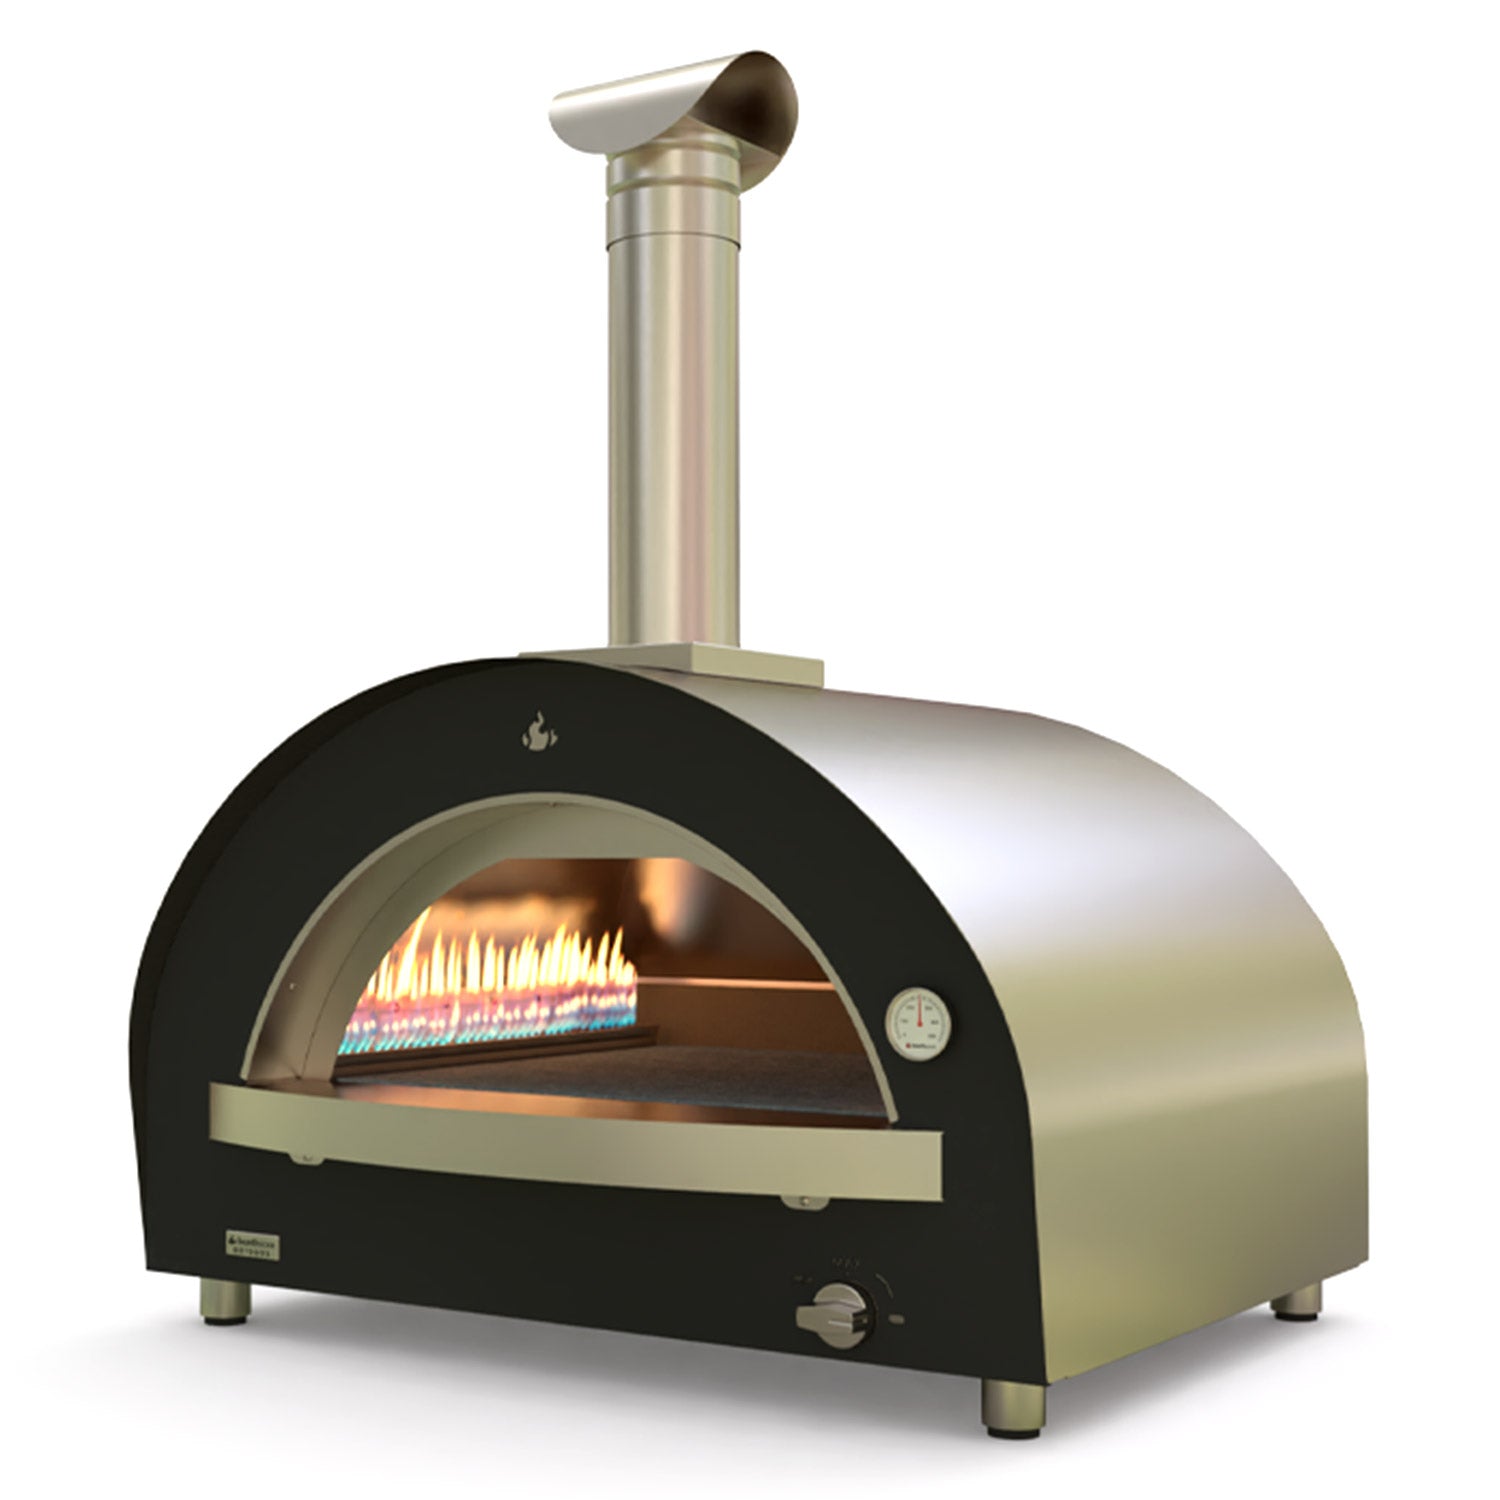 Genio Multi-Fuel Pizza Oven 4.9 (Stainless/Black)